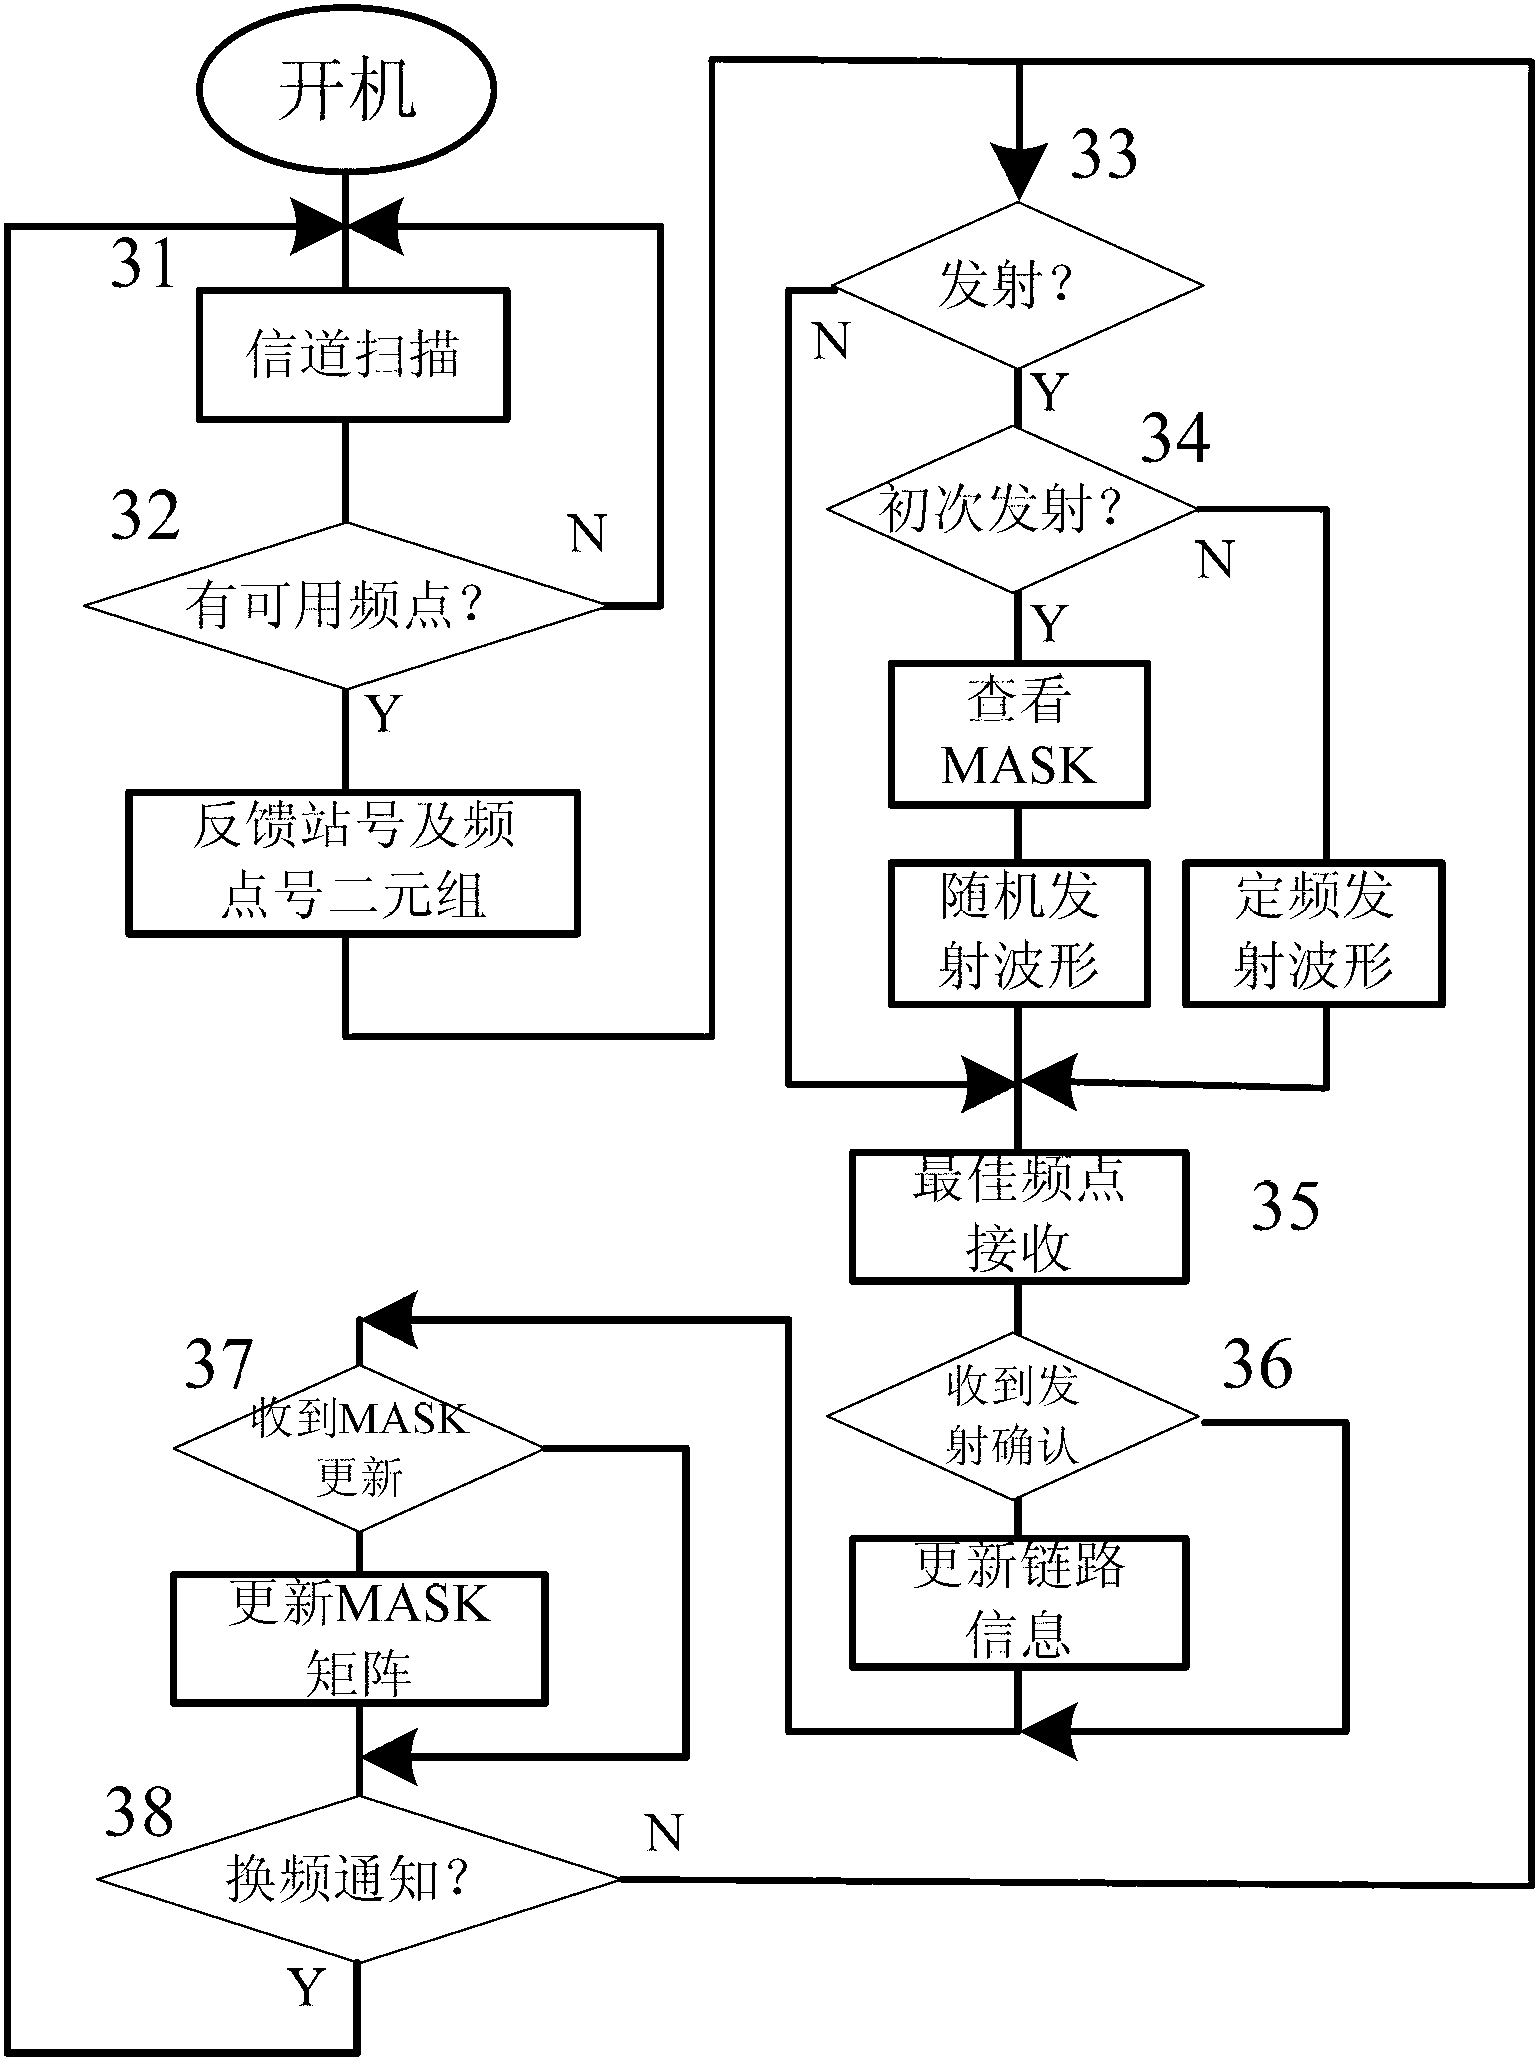 HF (High Frequency) radio state networking method based on resource distributing policy